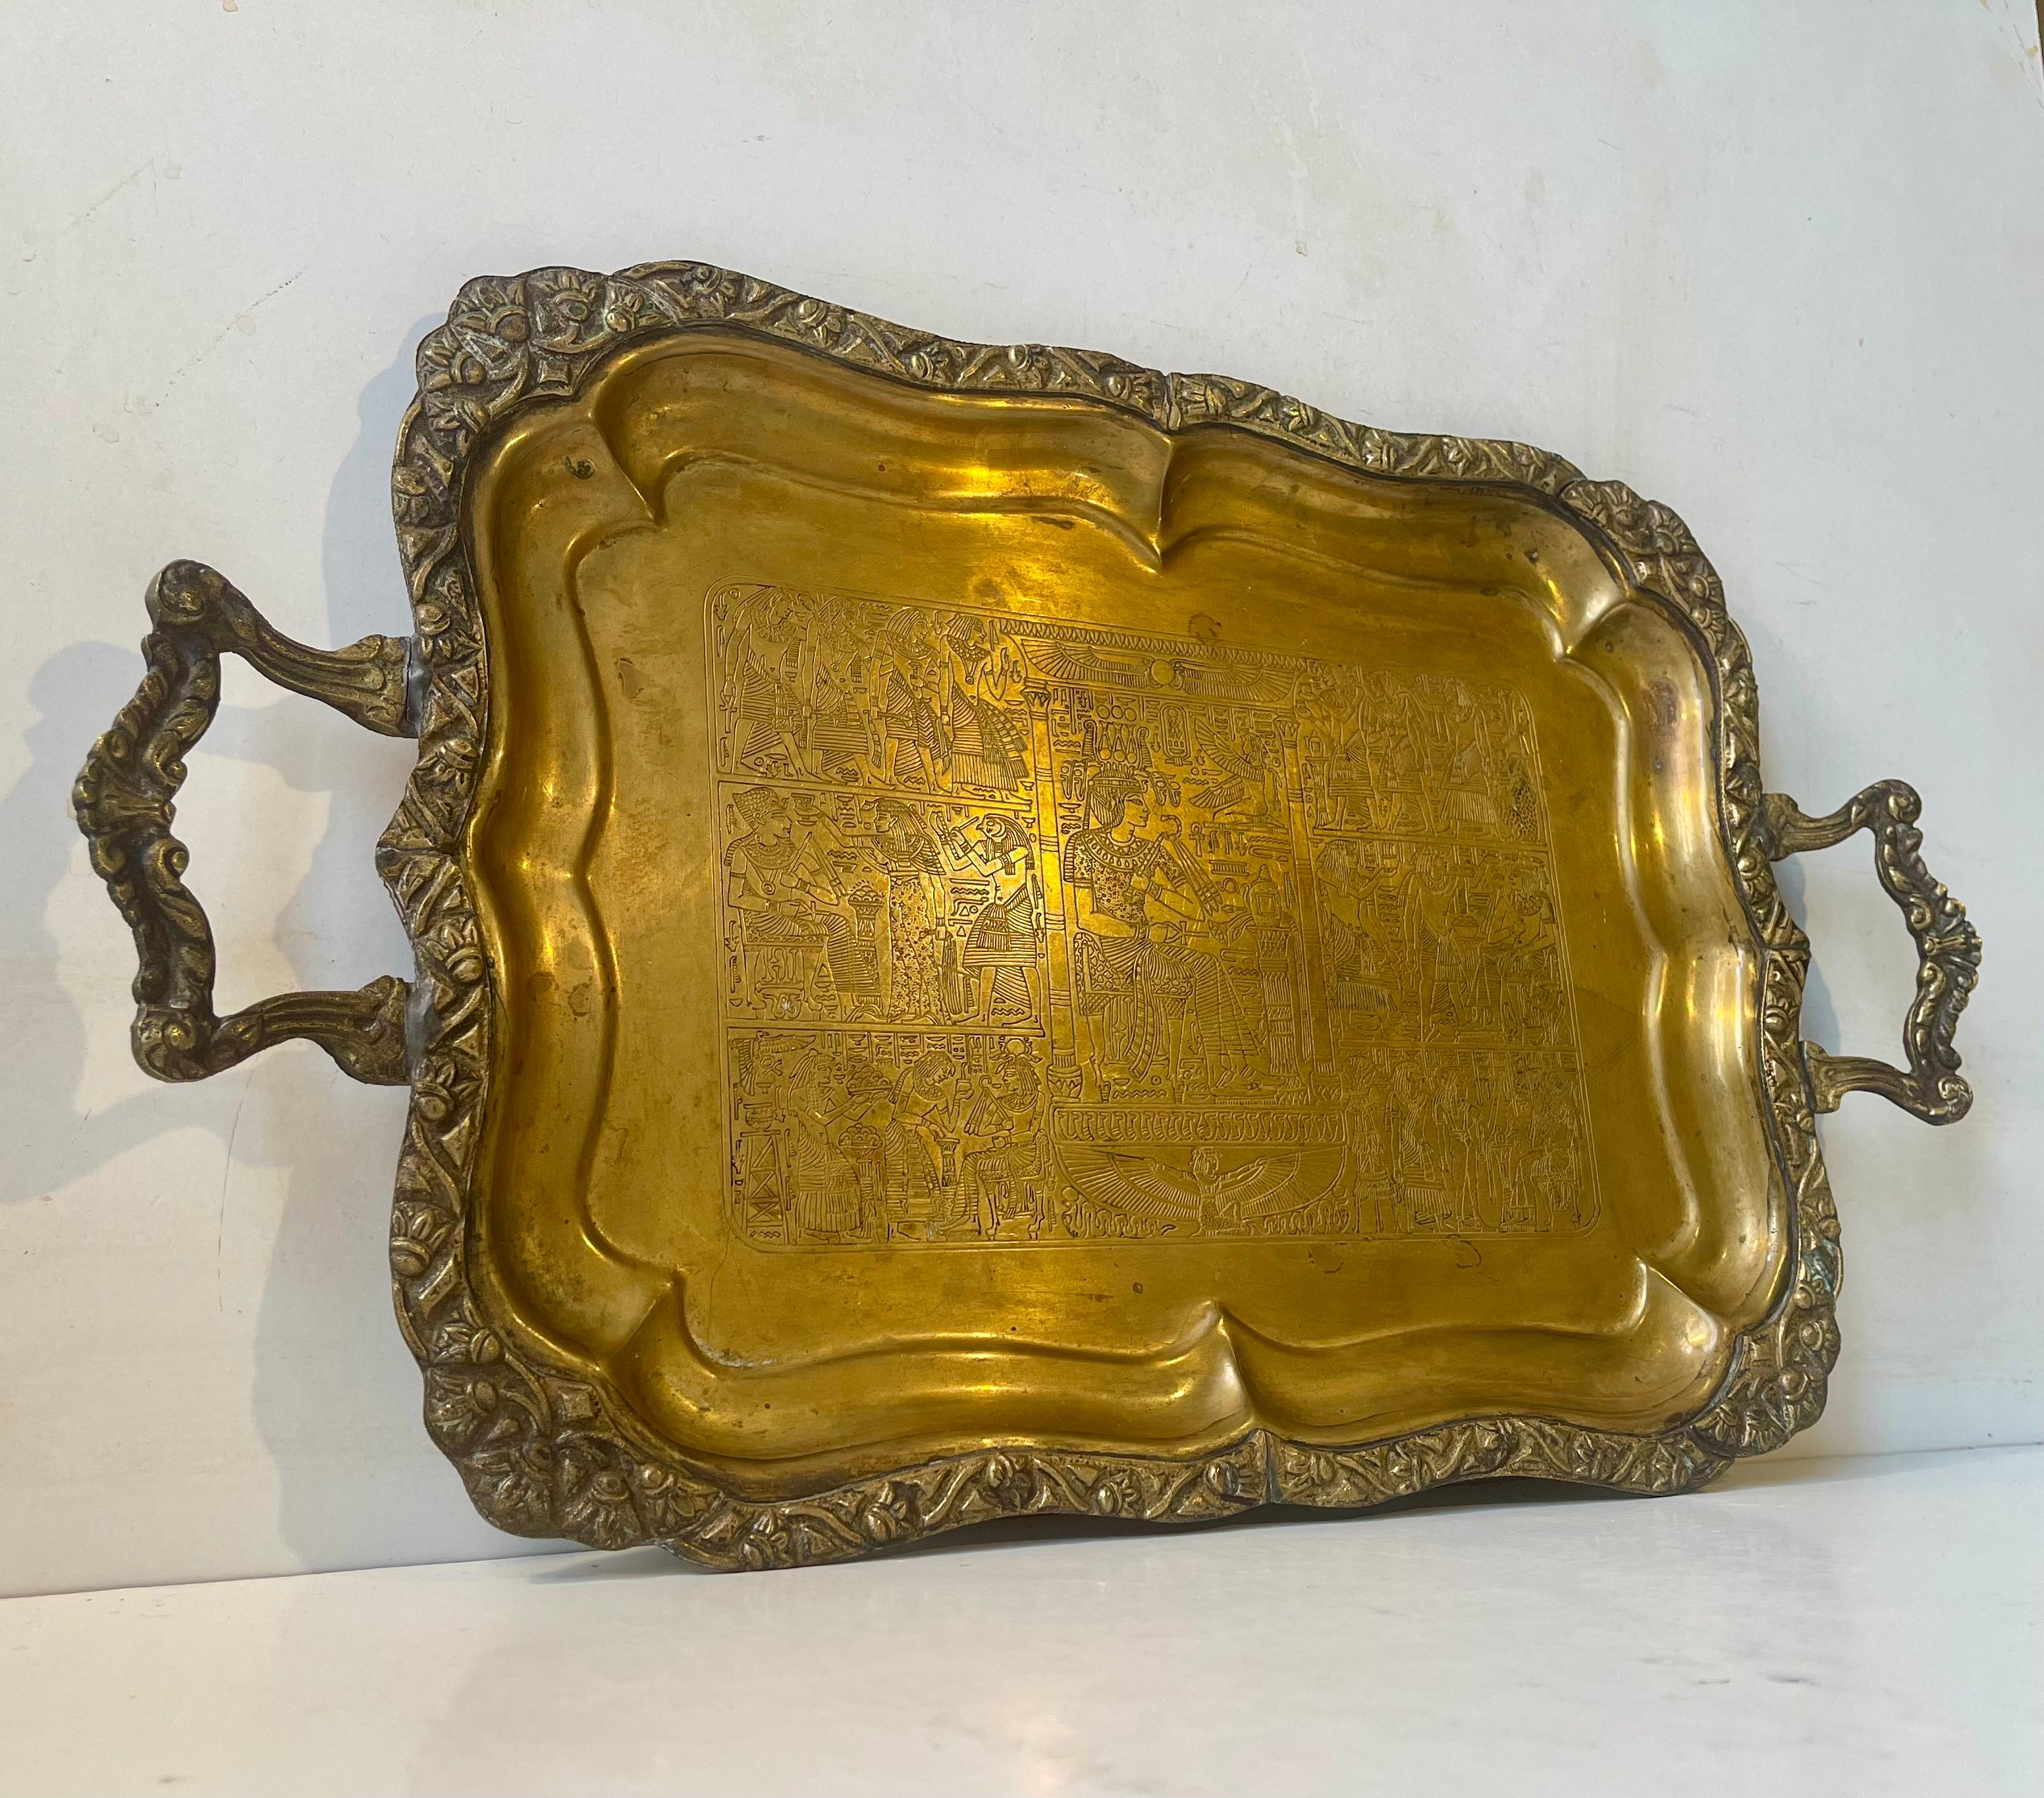 Hand-engraved Egyptian serving tray in brass. Imported as a souvenir to Denmark circa 1950-60. It features ornamented handles, hieroglyphs and pharaoh depictions. Measurements: L: 47 cm, H: 2-4 cm, W: 28 cm.

Free World wide express shipping.